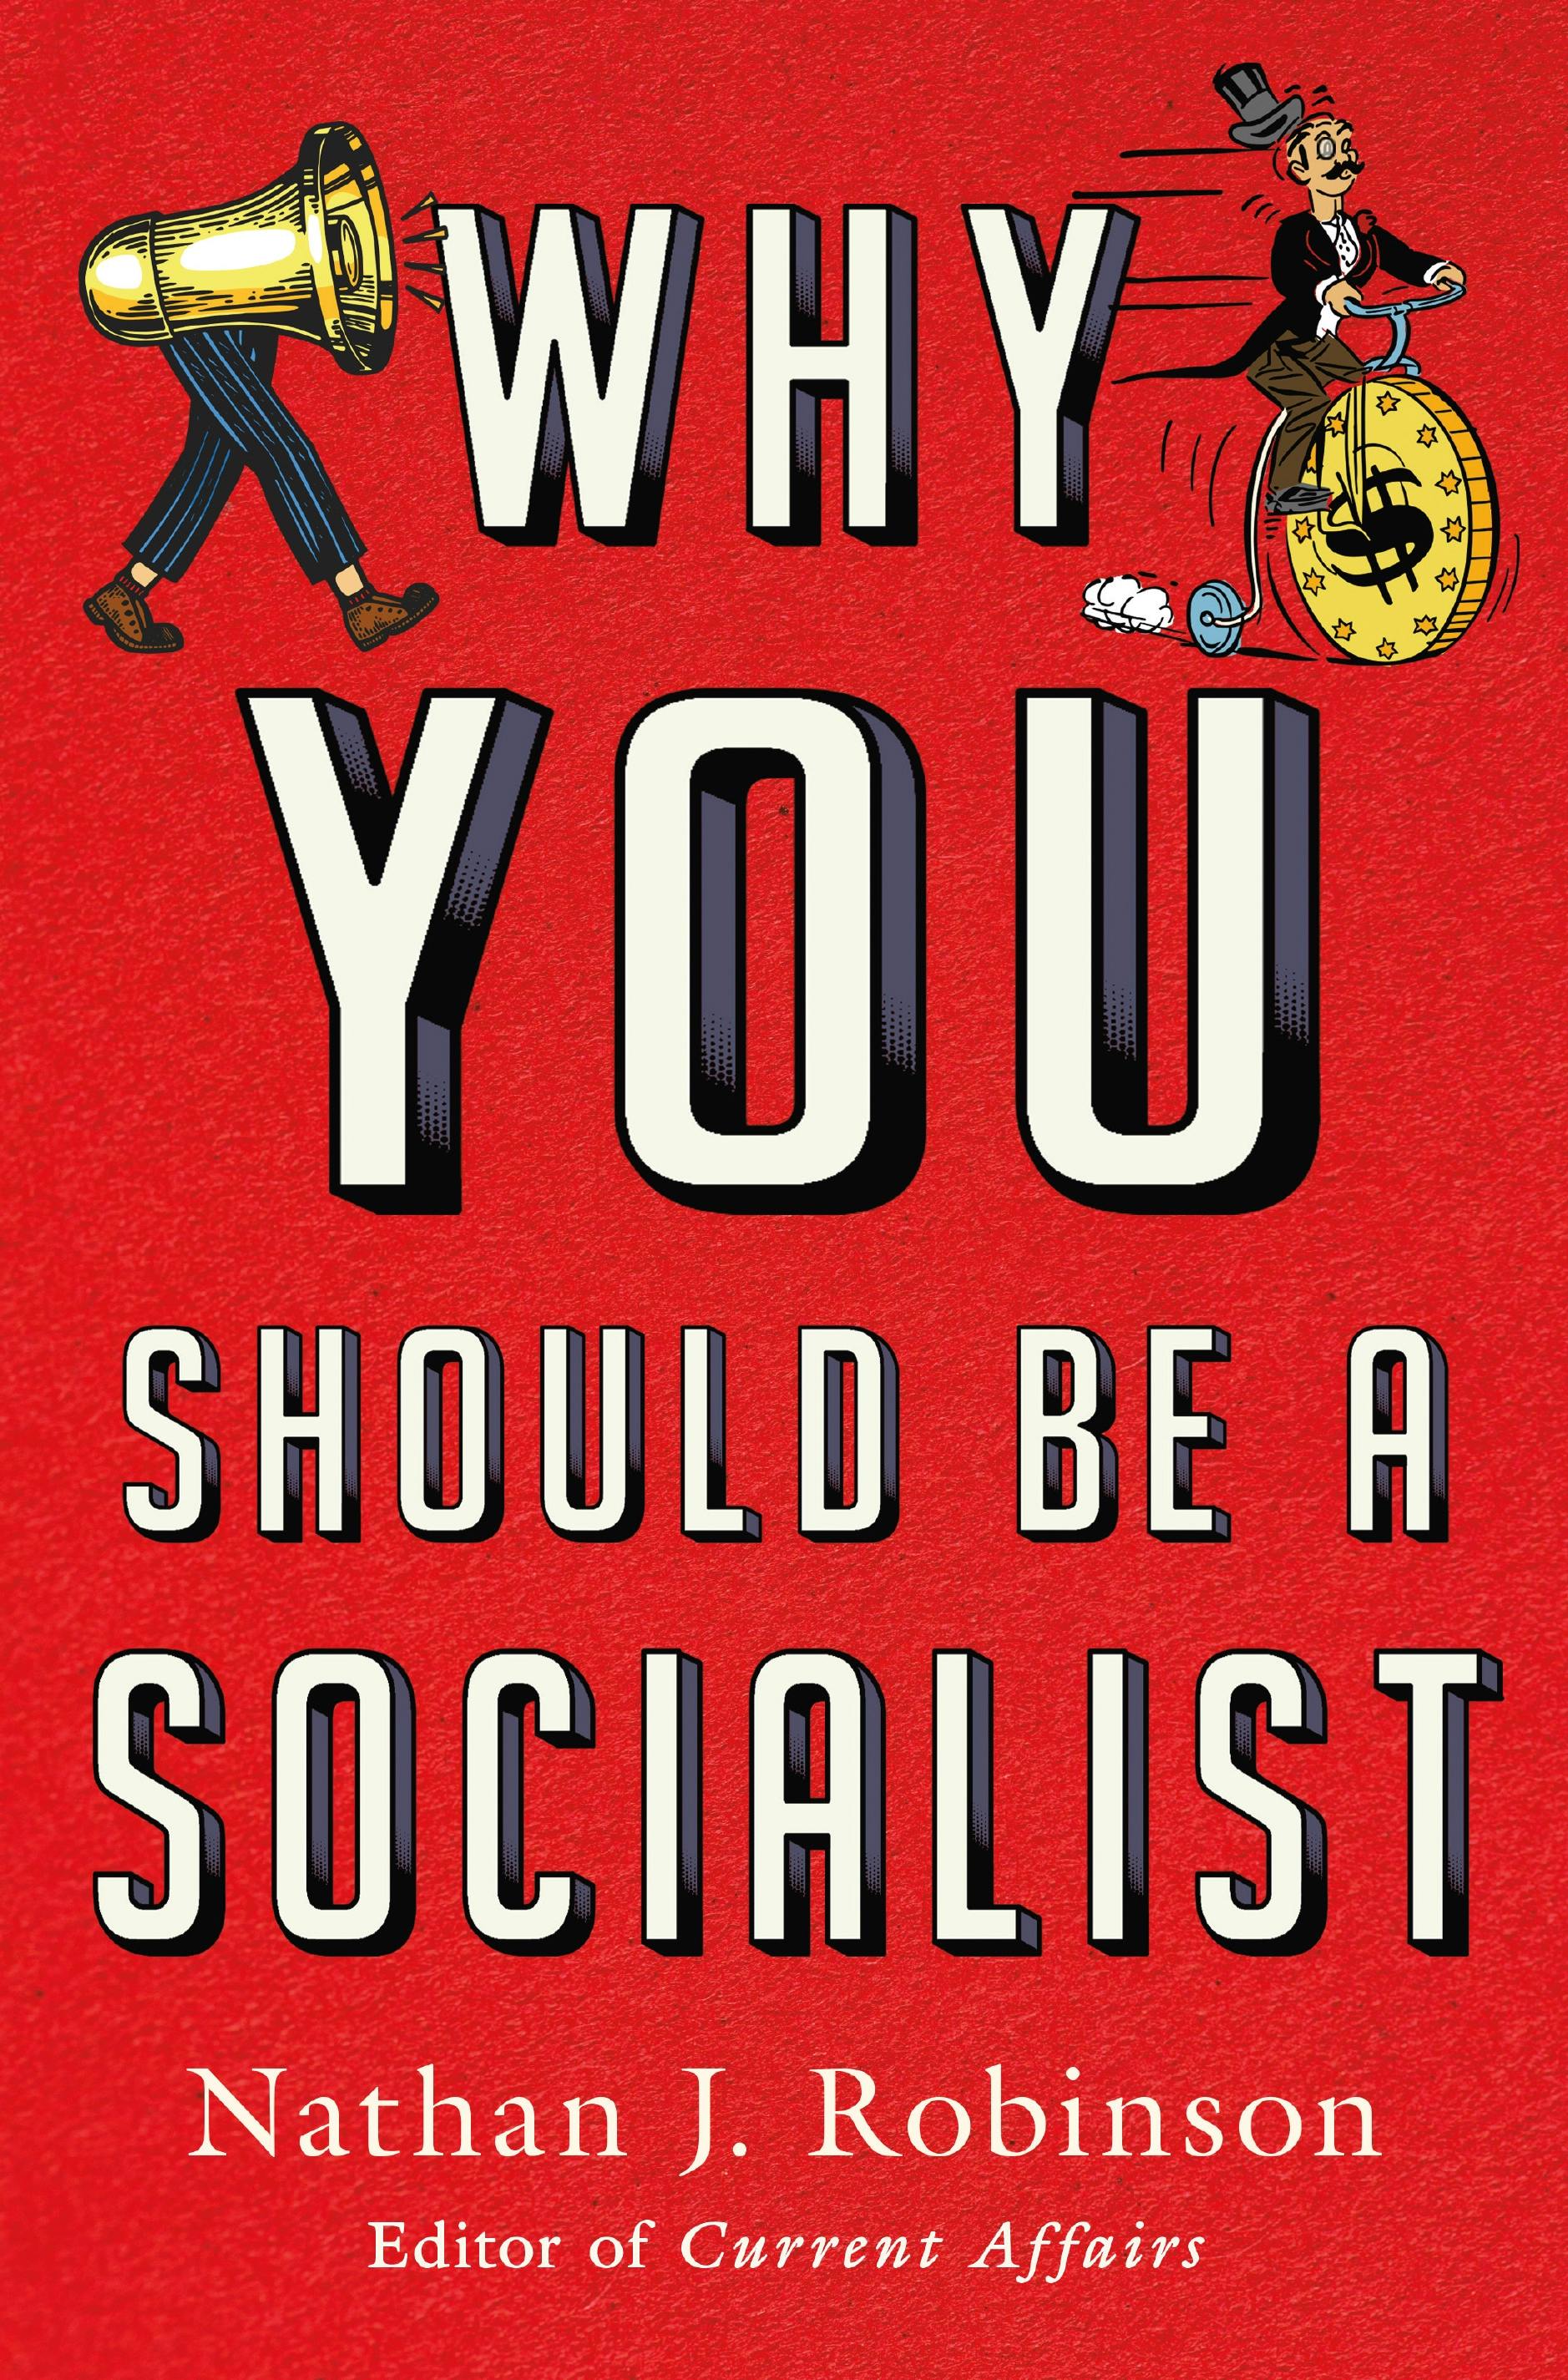 The Politically Incorrect Guide to Socialism (Politically Incorrect Guides)